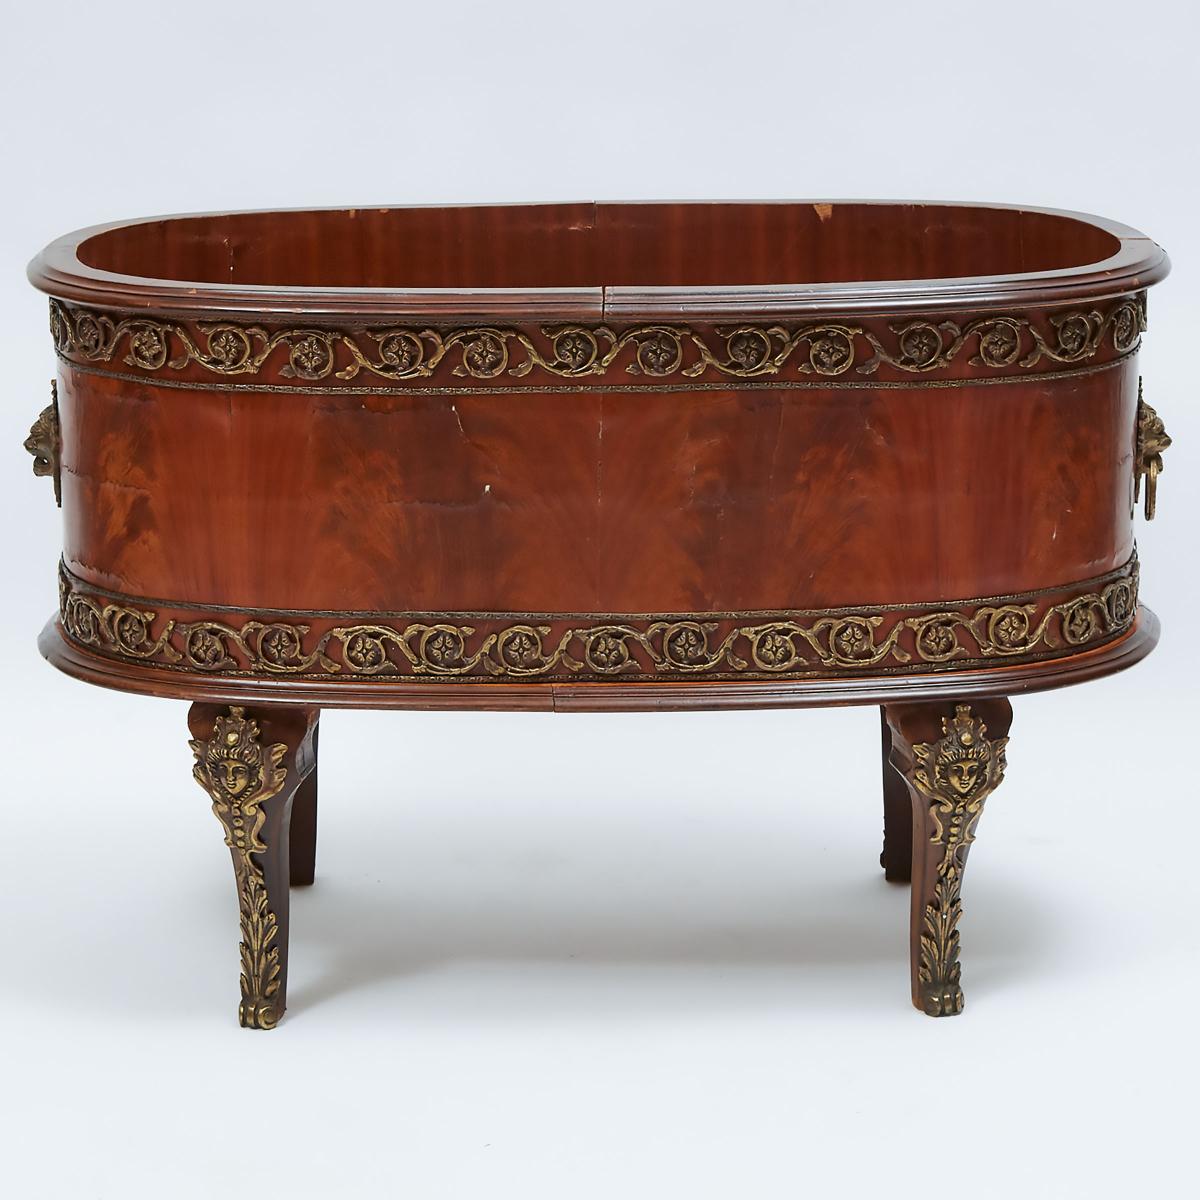 Large French Ormolu Mounted Oval Mahogany Jardiniere on Stand, c.1900, 24 x 36 x 19 in — 61 x 91.4 x